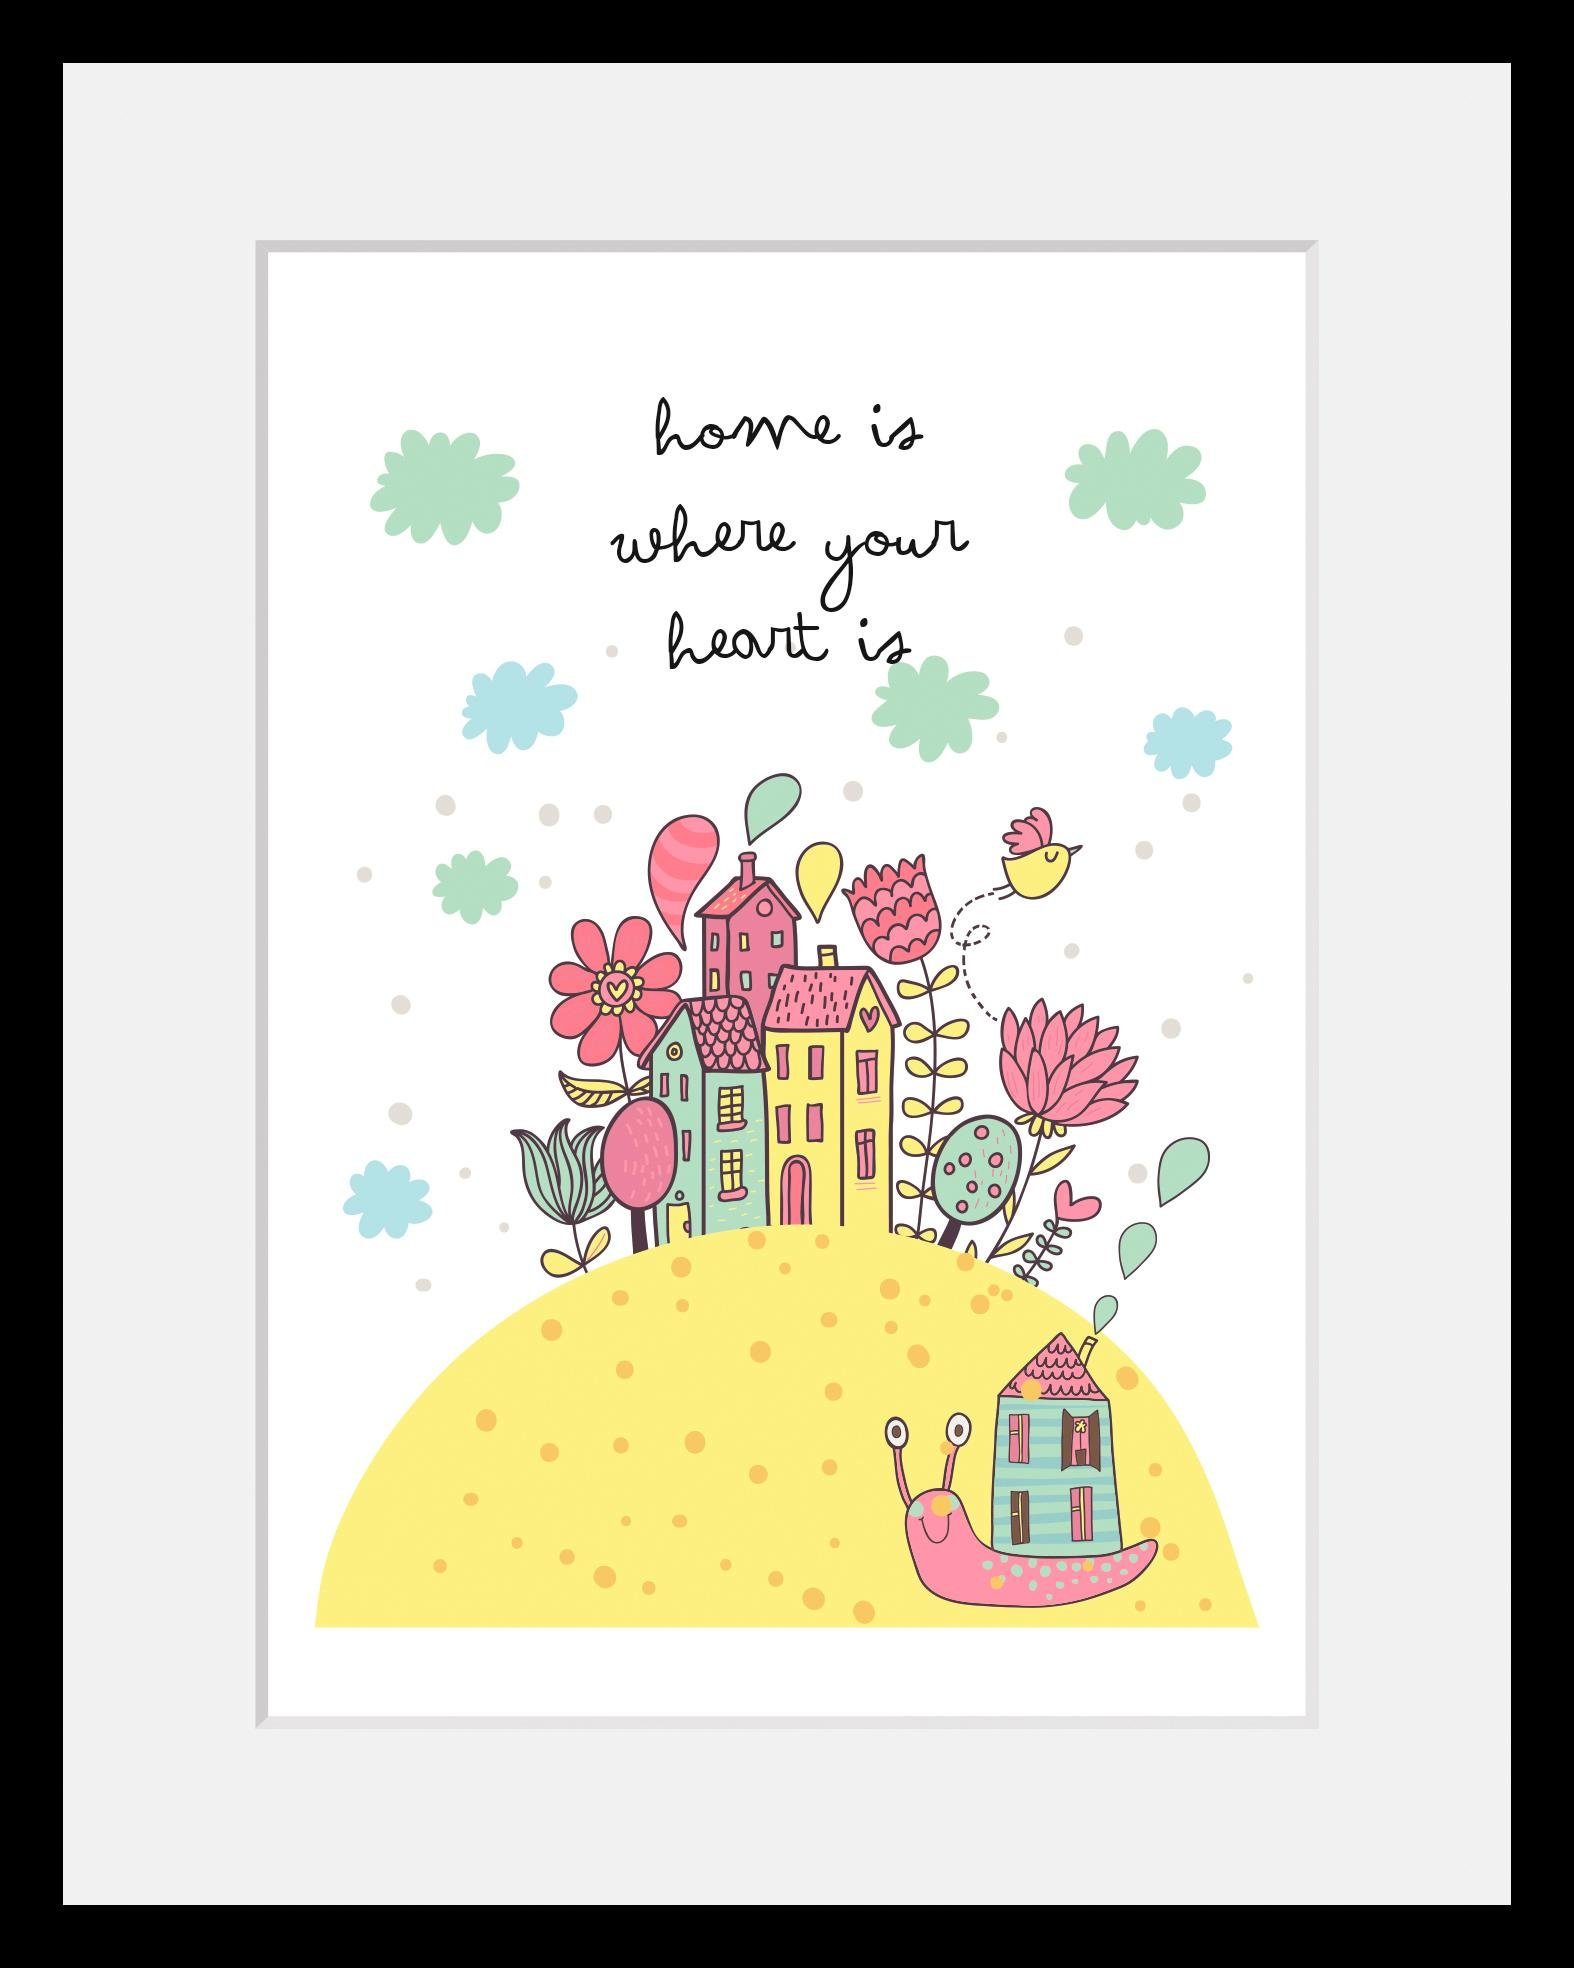 Home affaire Wanddecoratie Home is where your heart is met frame